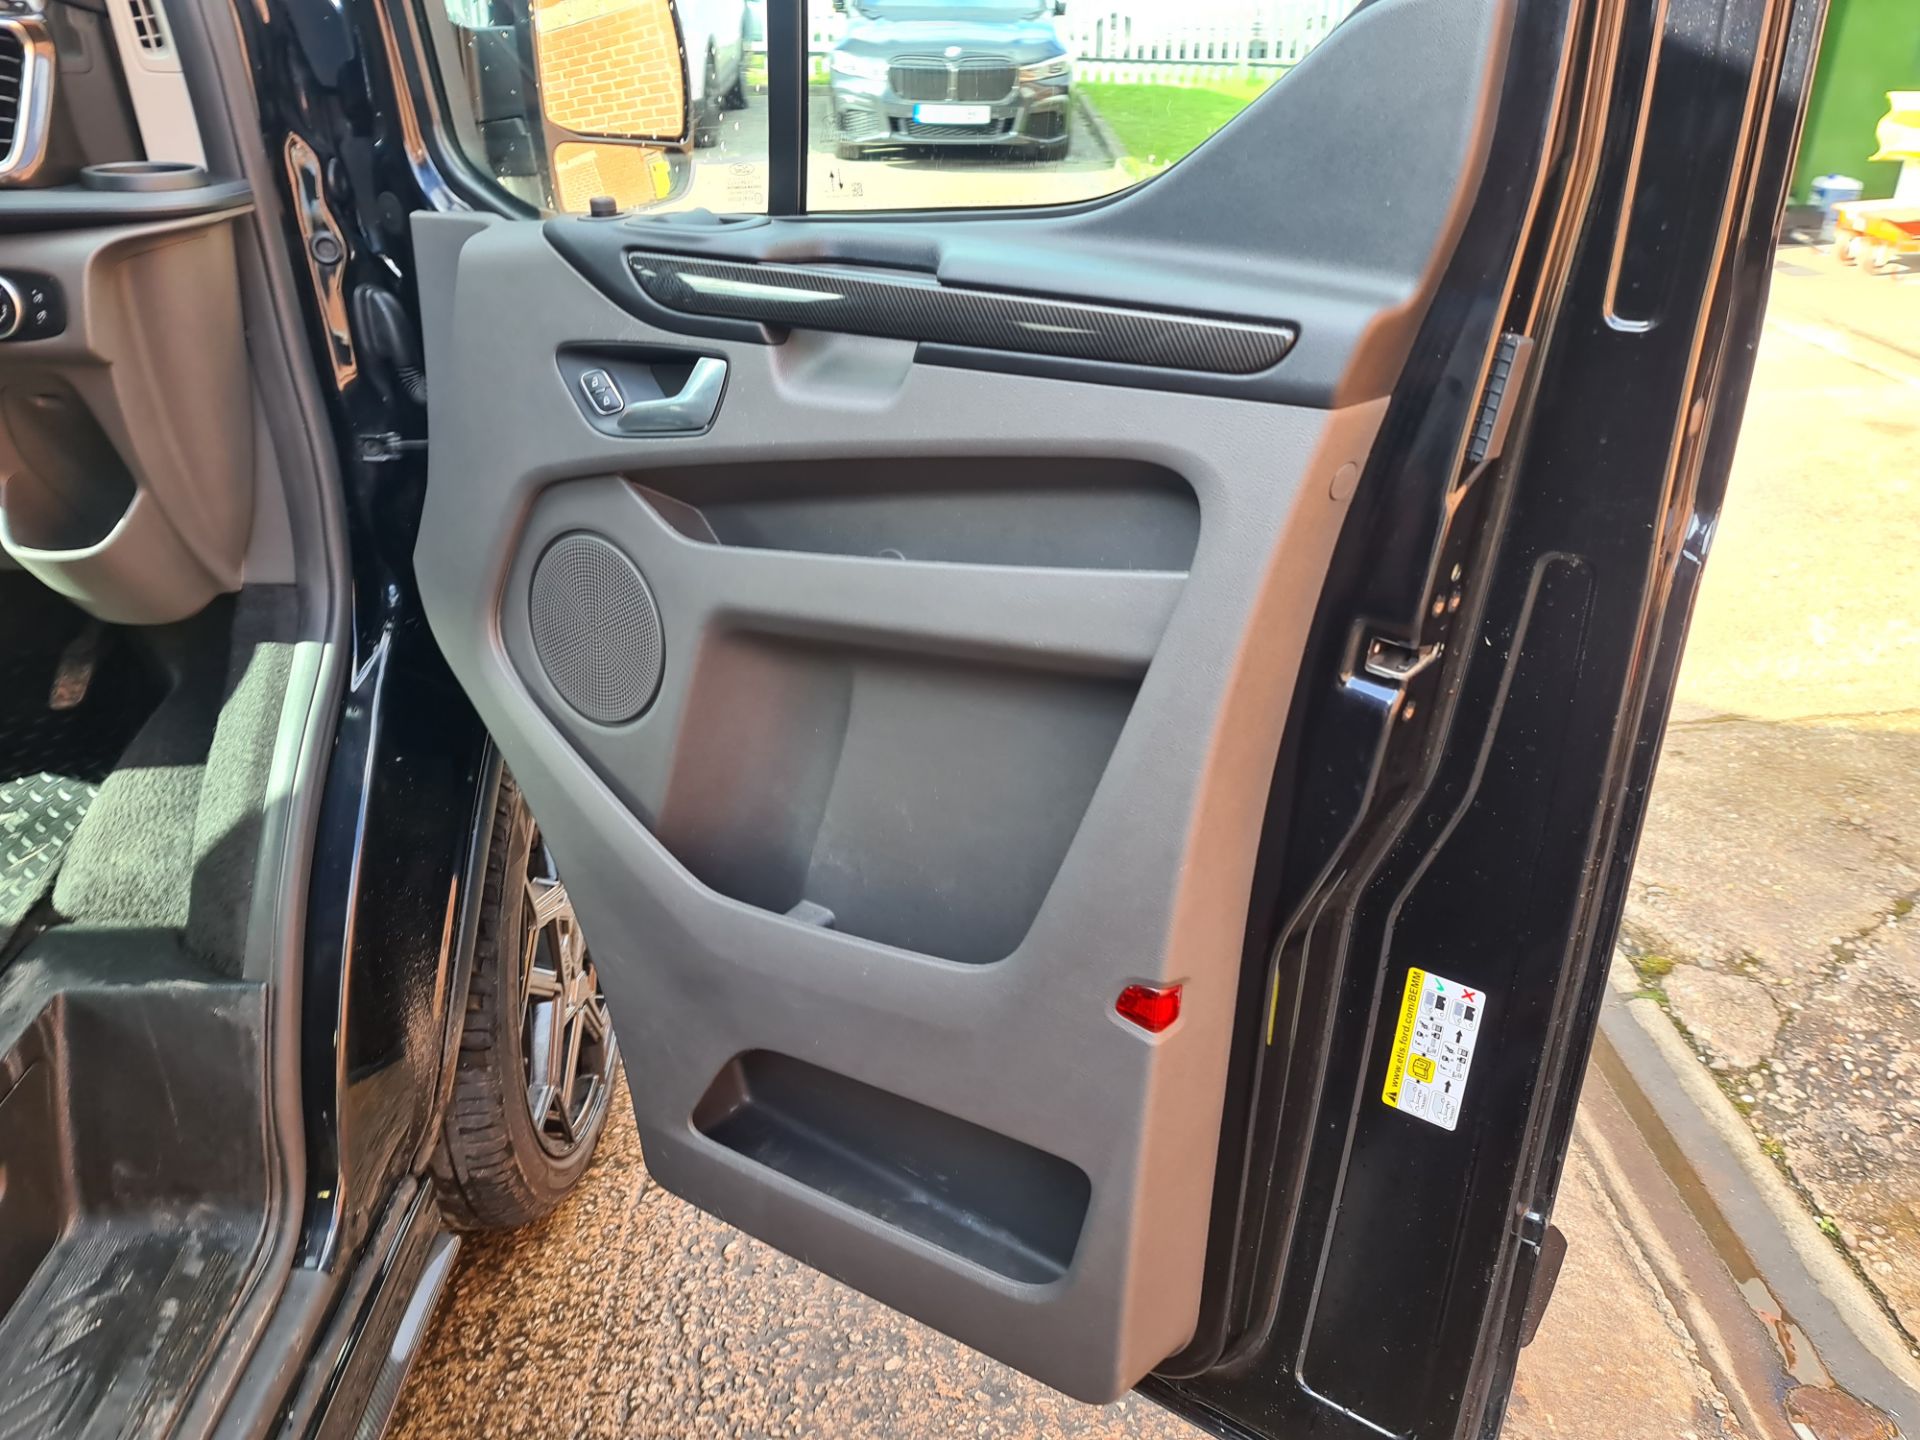 2021 Ford Transit 320LMTD Motion R panel van, auto gearbox, Ultra High Spec - Image 10 of 102